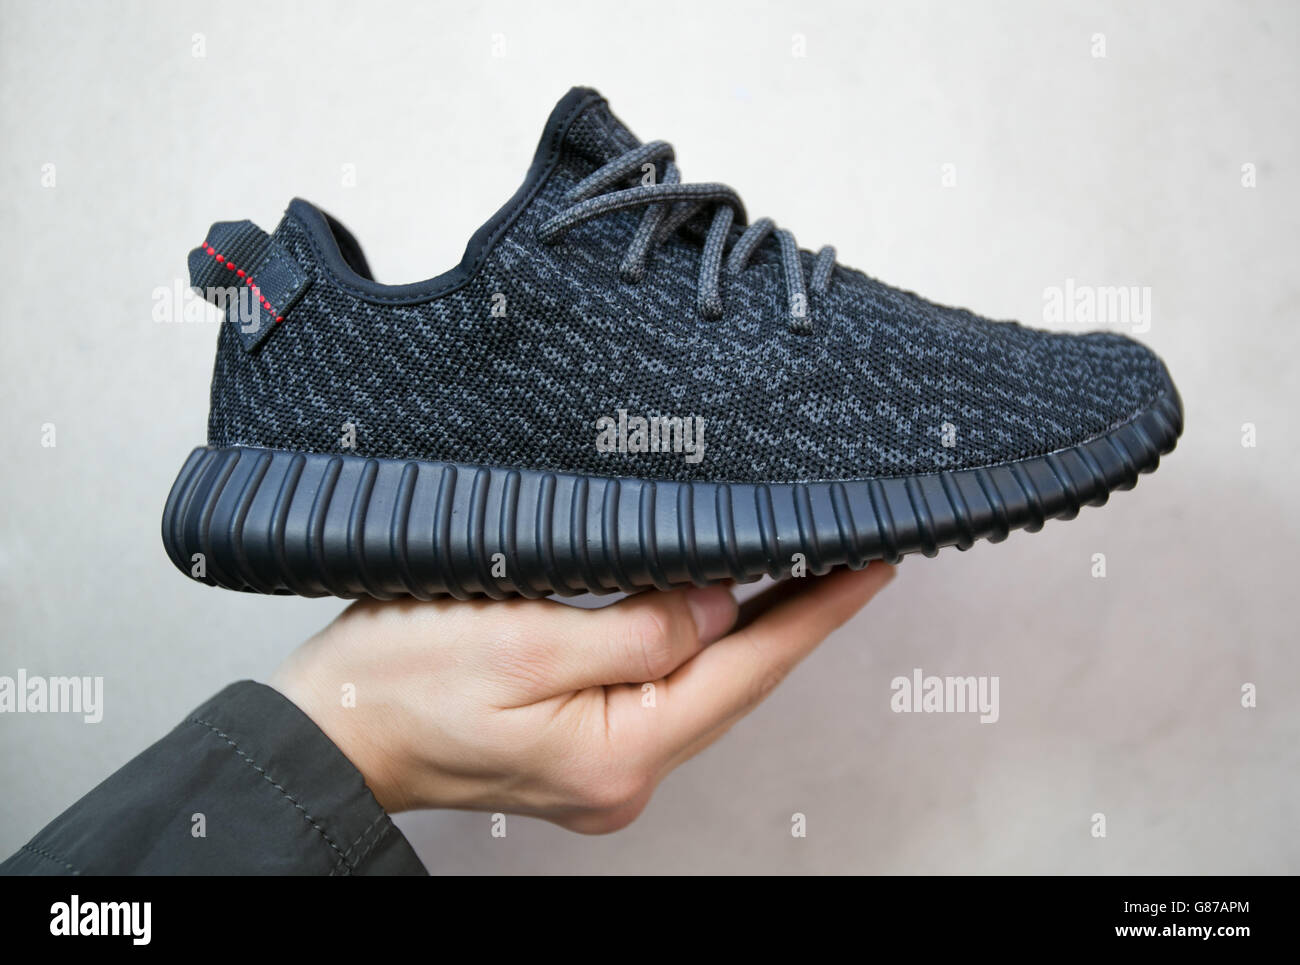 Sultan Est, bought a pair of limited addition Adidas Yeezy Boost 350  trainers, designed by musician Kanye West, at Foot Locker in Oxford Street,  London Stock Photo - Alamy